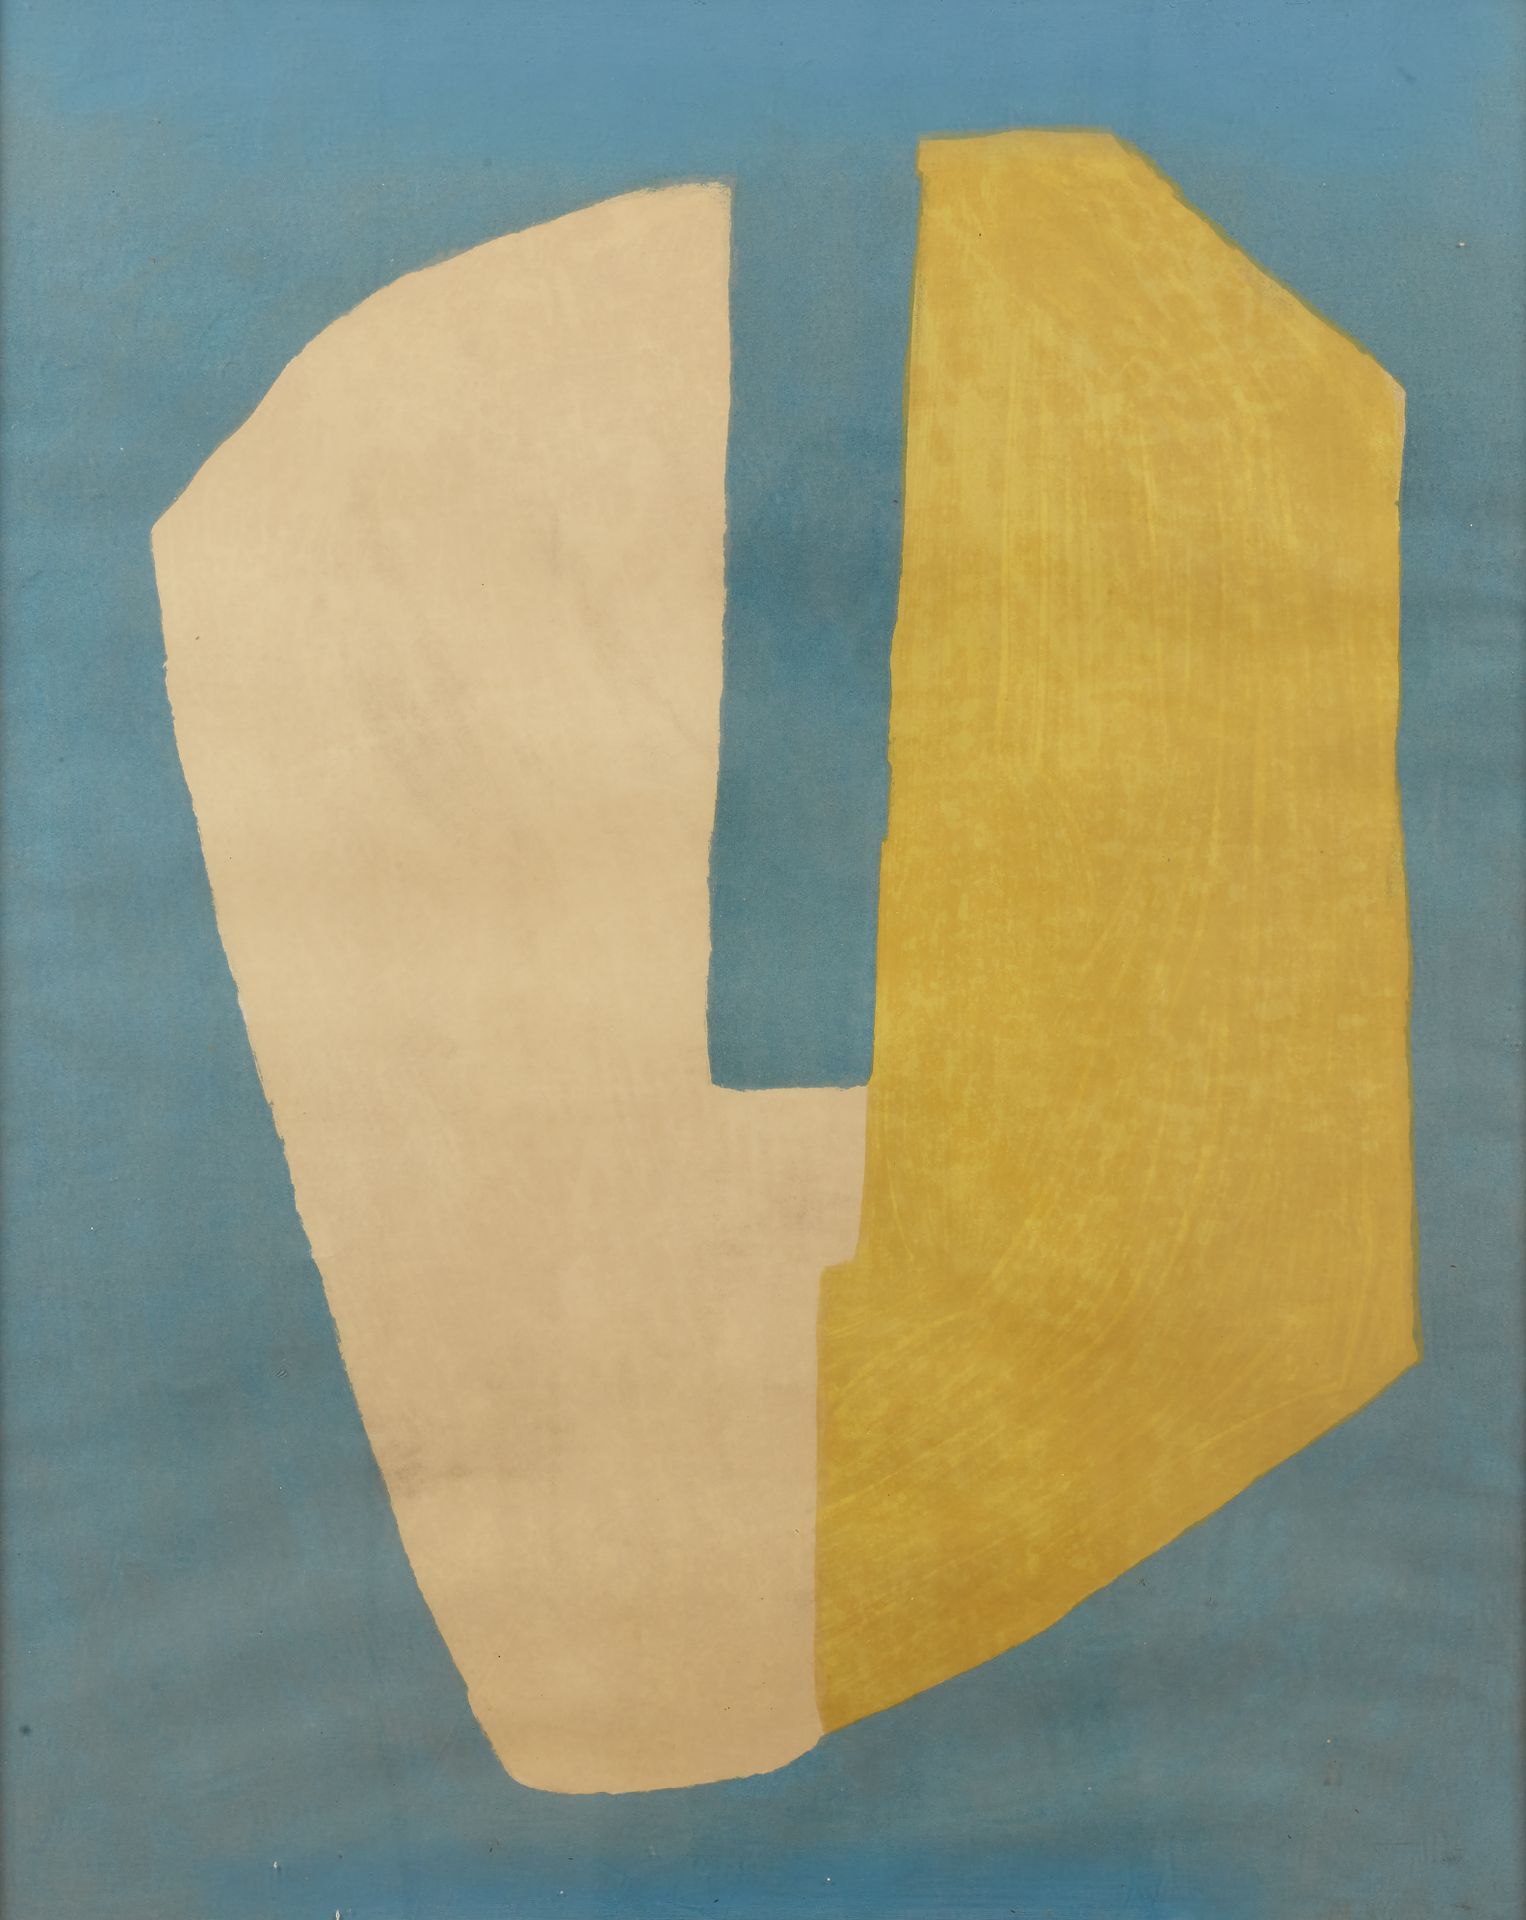 Null After Serge POLIAKOFF (1900-1969)
Yellow and blue composition, 1968 
Lithog&hellip;